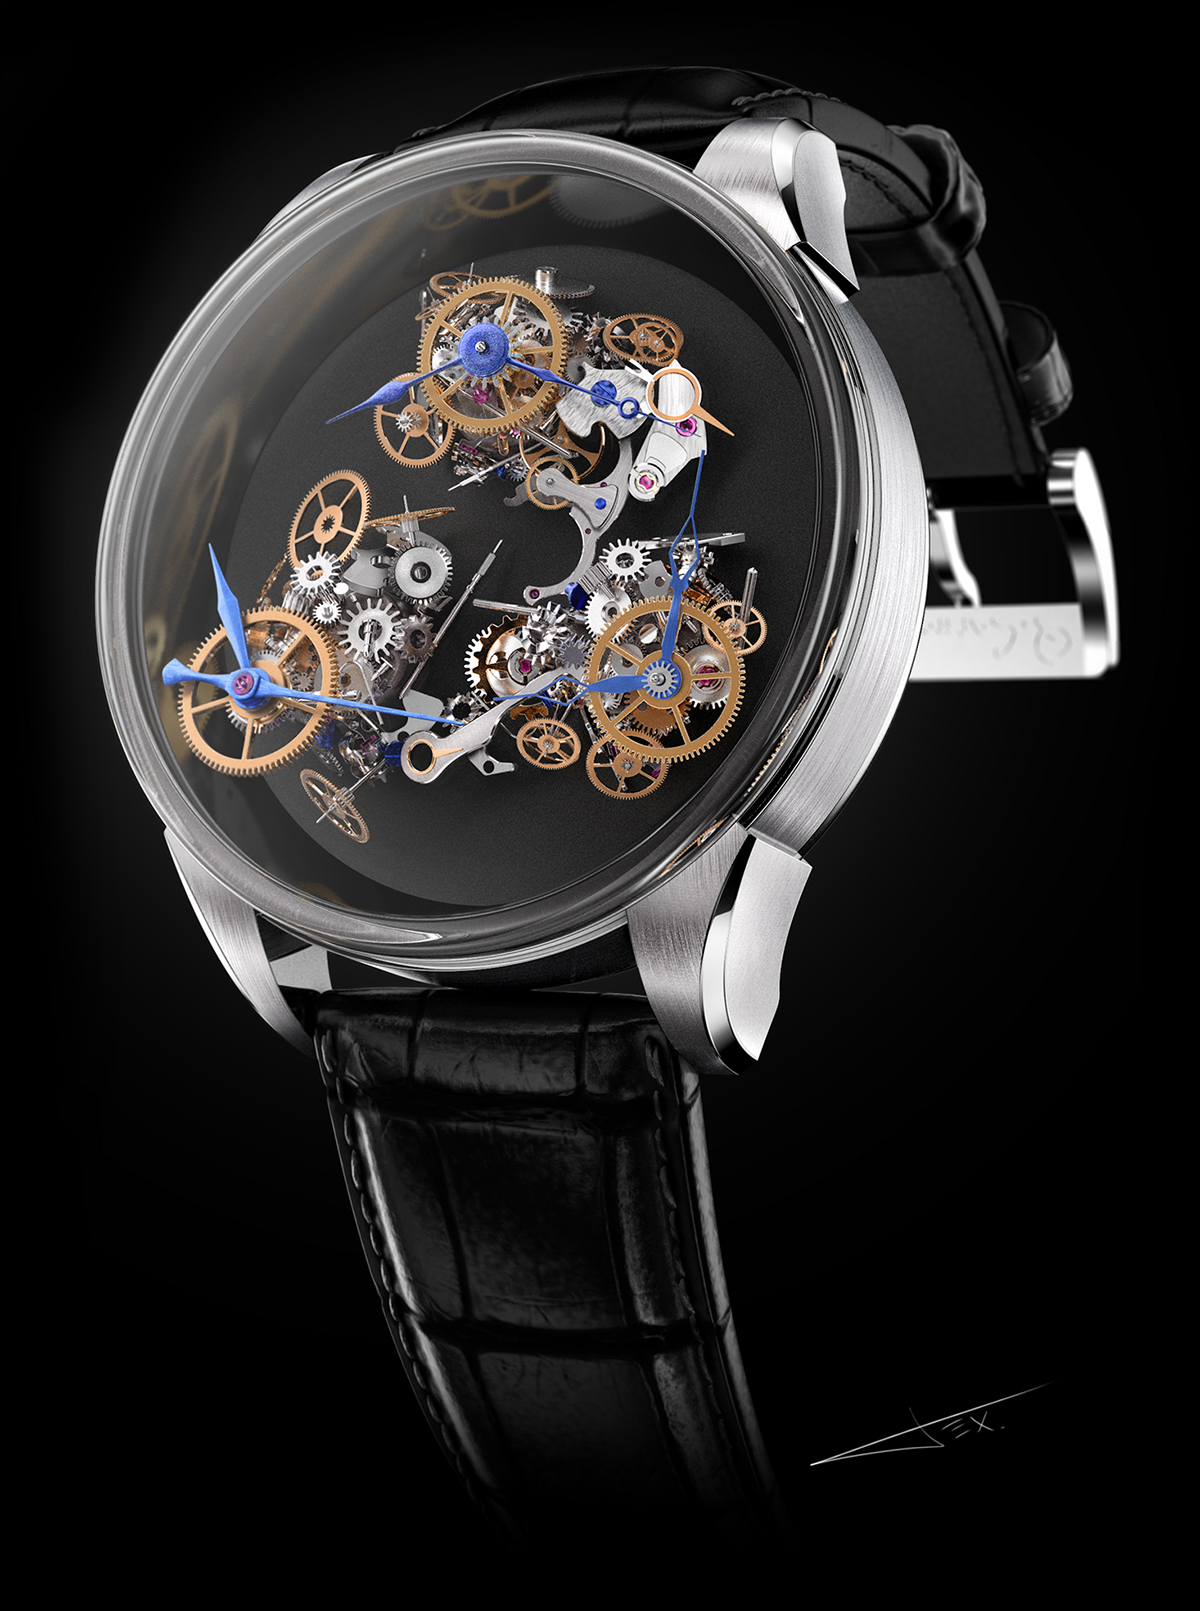 watch design ISD luxury jewelry CGI Still Quentin carnaille maxence texier art